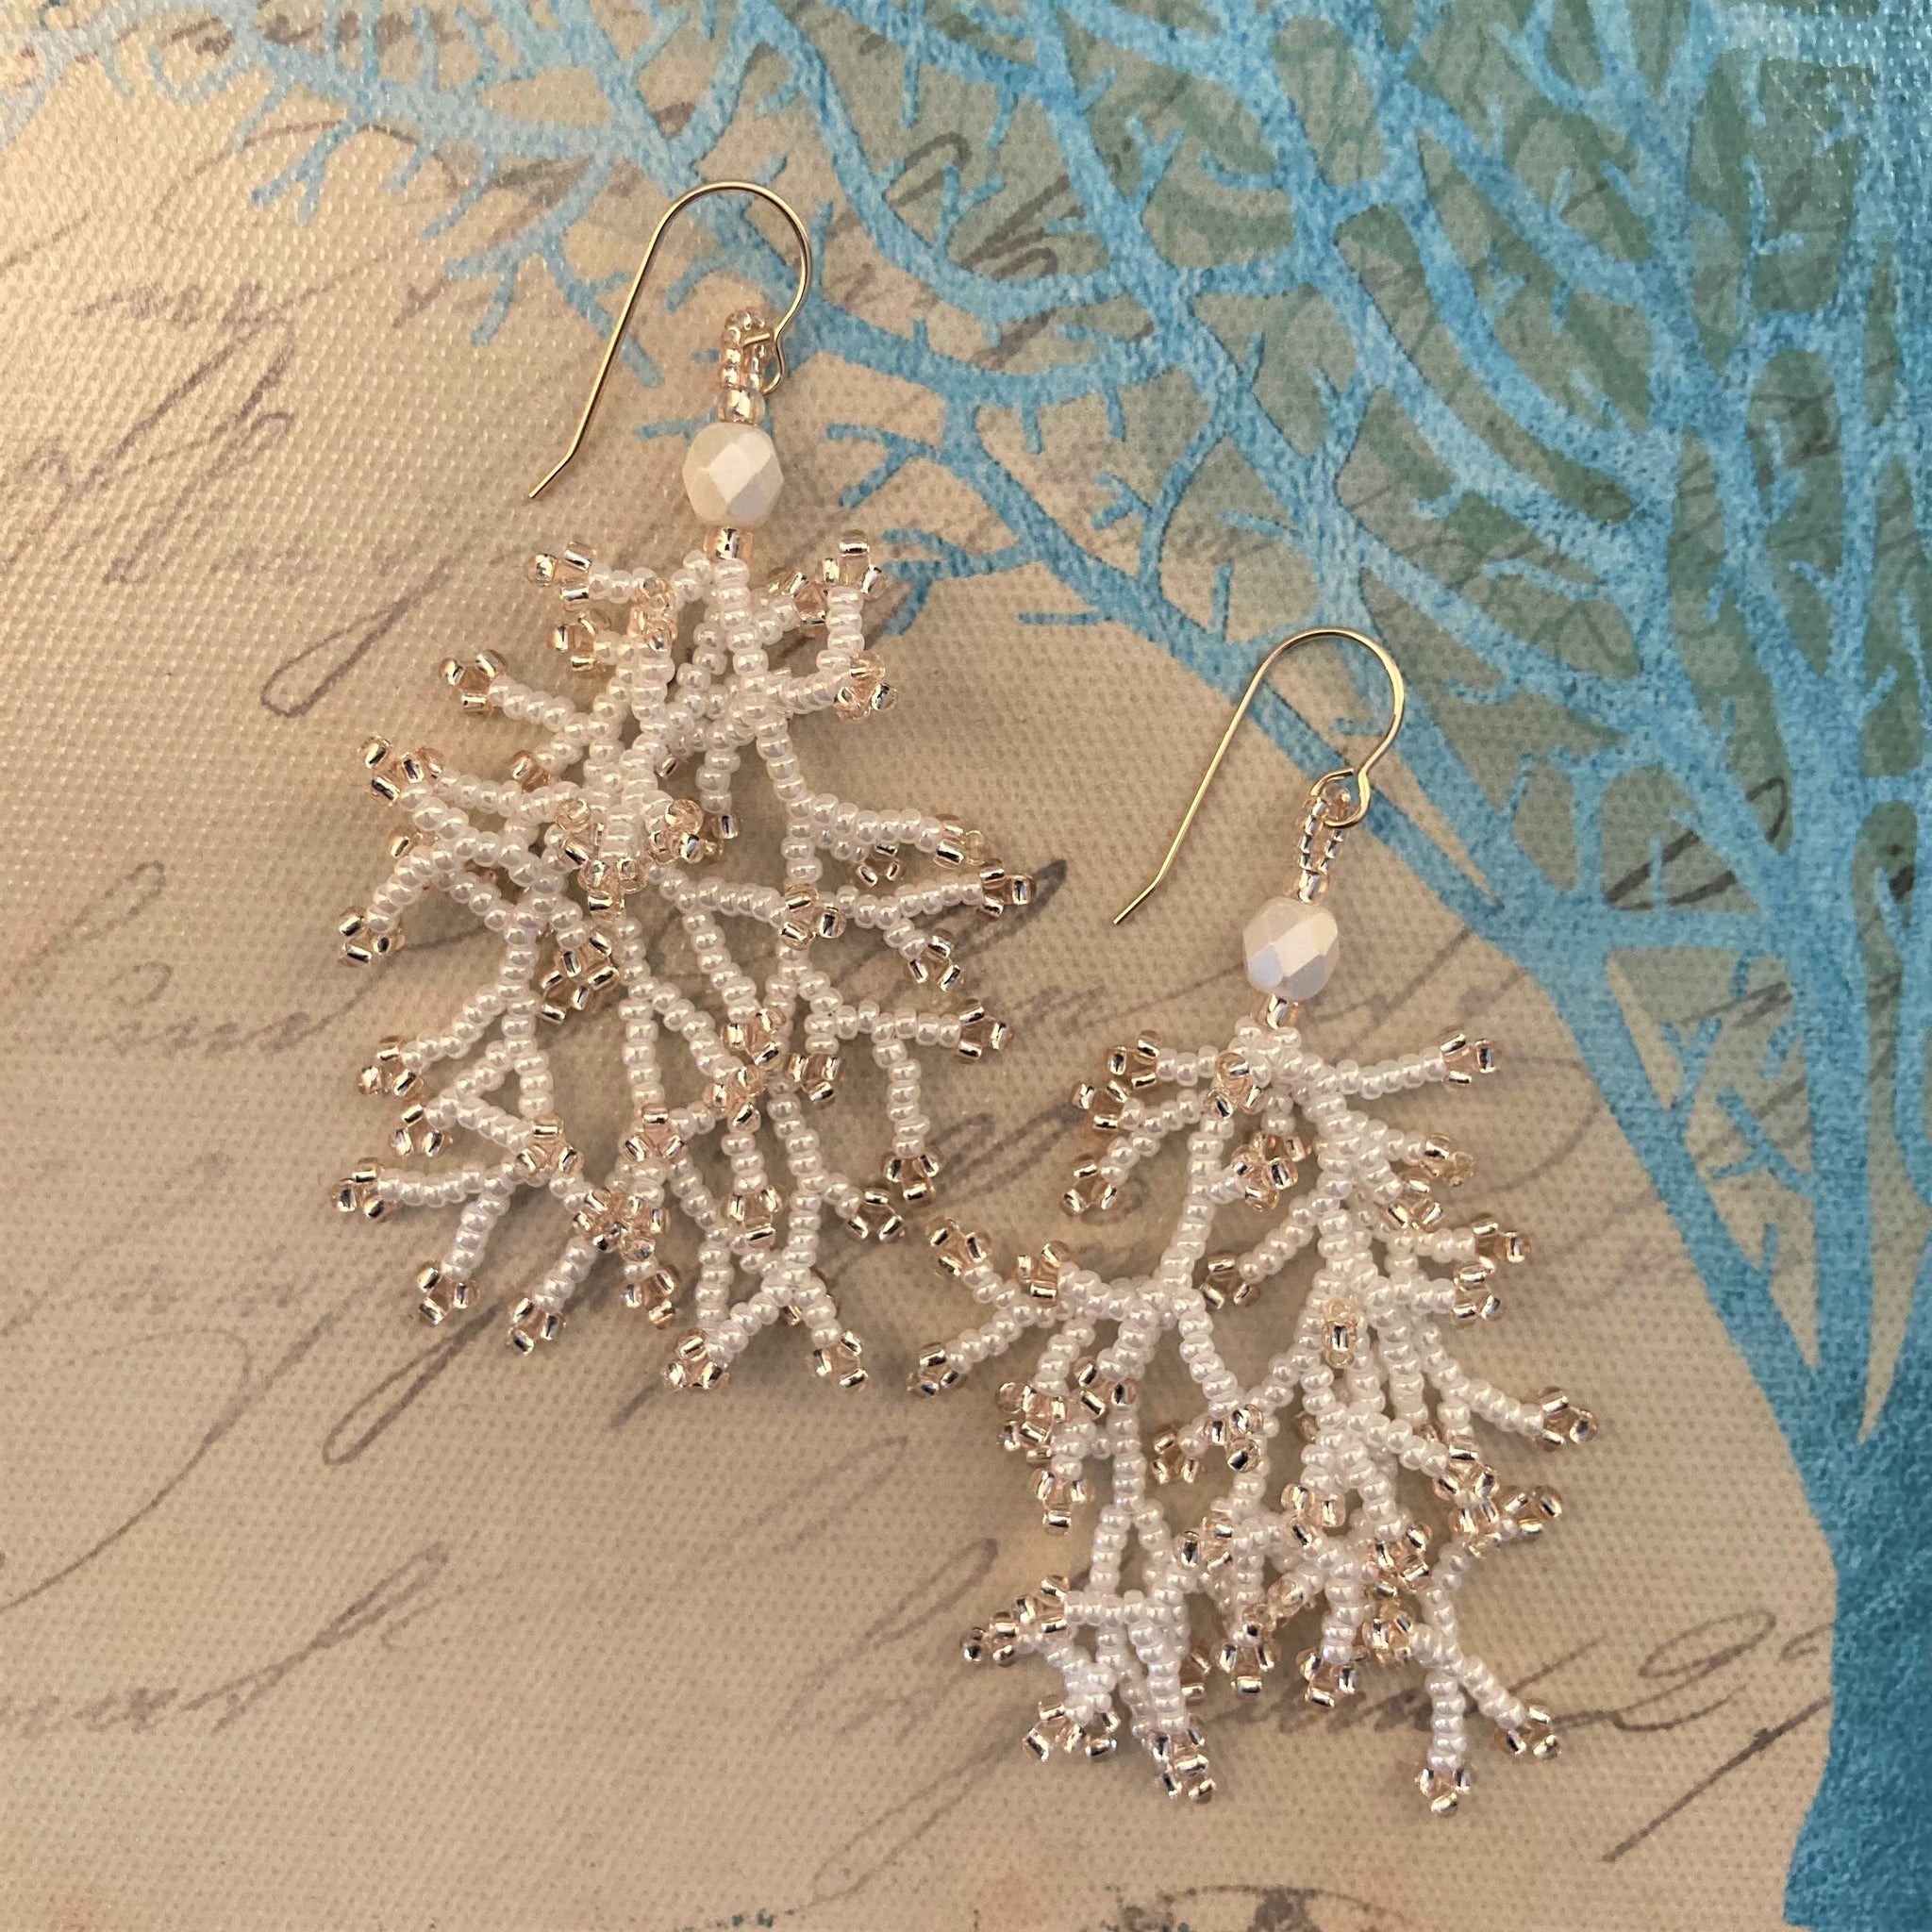 Coral branch tassel seed bead earrings beach destination wedding bridal pearly white full flirty ocean resort party prom gifts surf 14k Gold filled Sterling Silver 